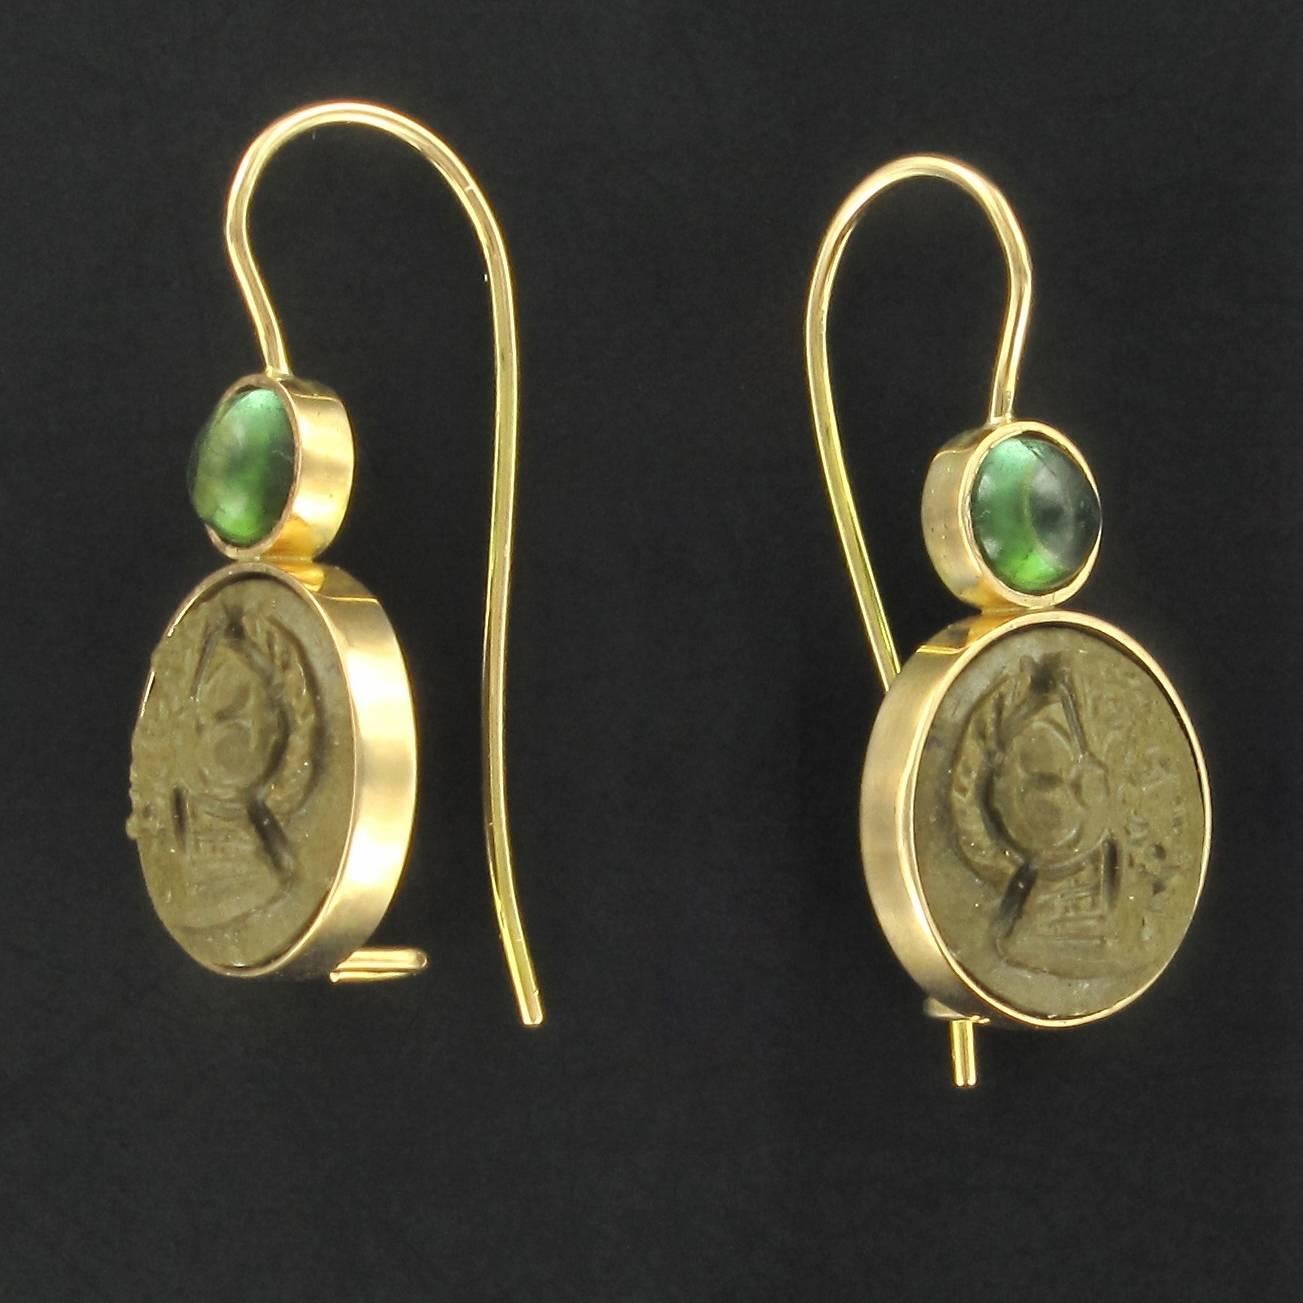 Creation Baume - Unique piece.
Earrings in 18 carats yellow gold.
Lovely drop earrings, each are set closed with a cameo on lava stone representing a helmeted warrior and surmounted by a tourmaline cabochon also set closed. The clasp is a gooseneck